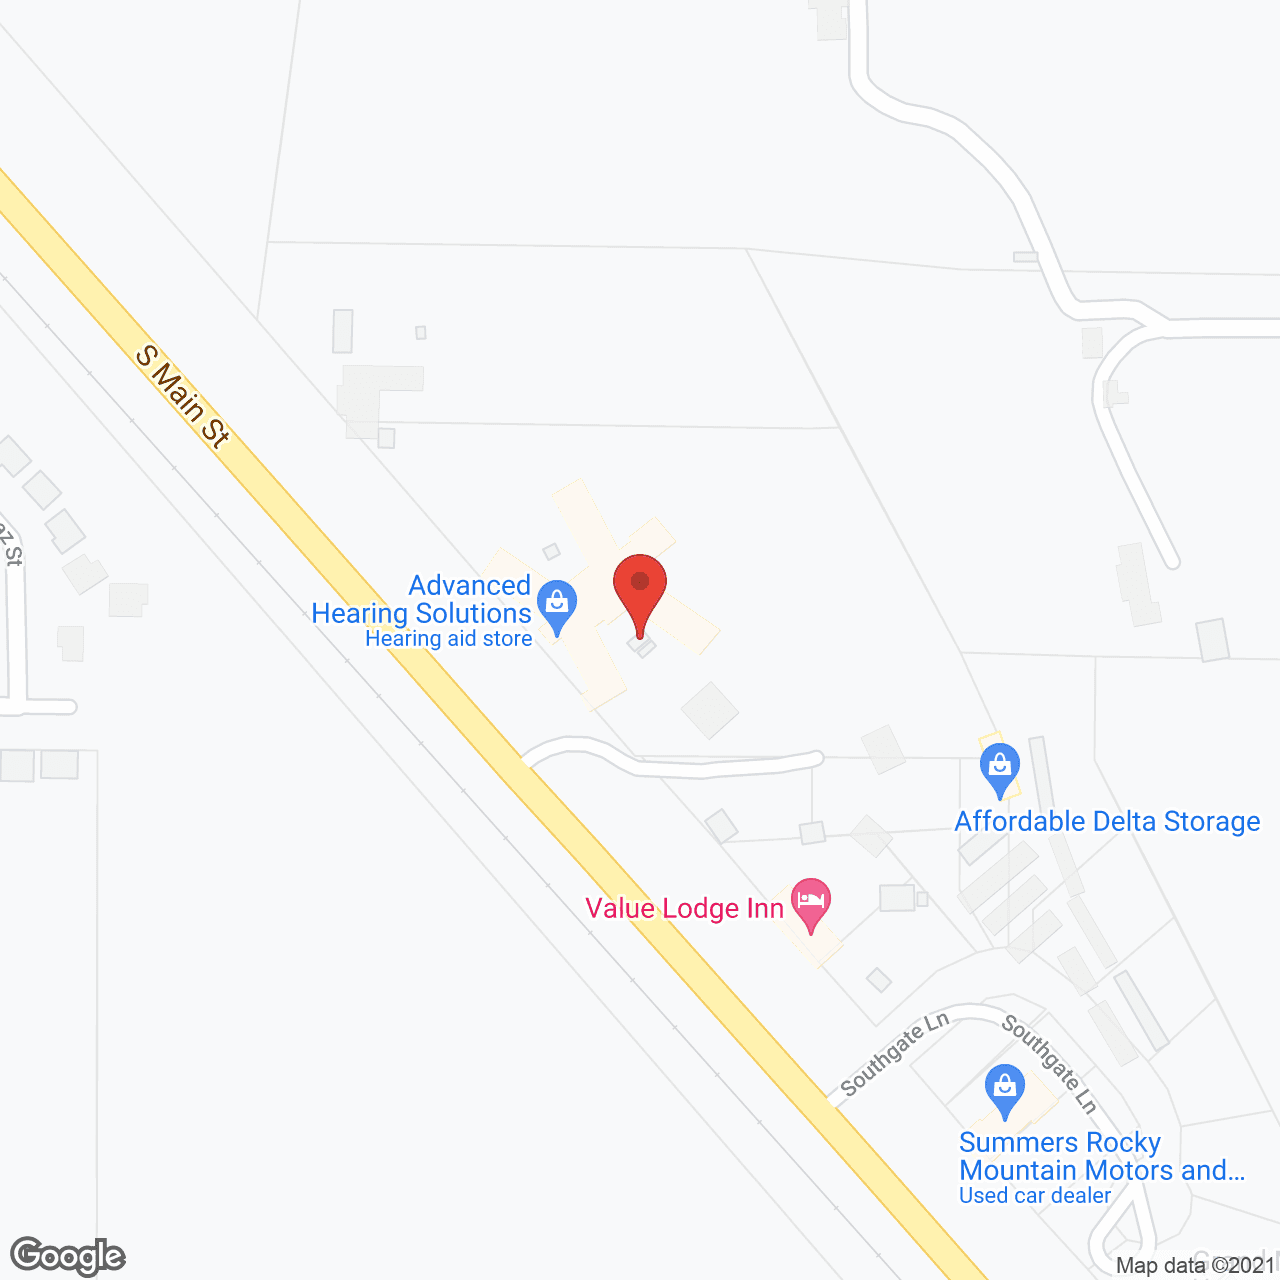 Willow Tree Care Center in google map